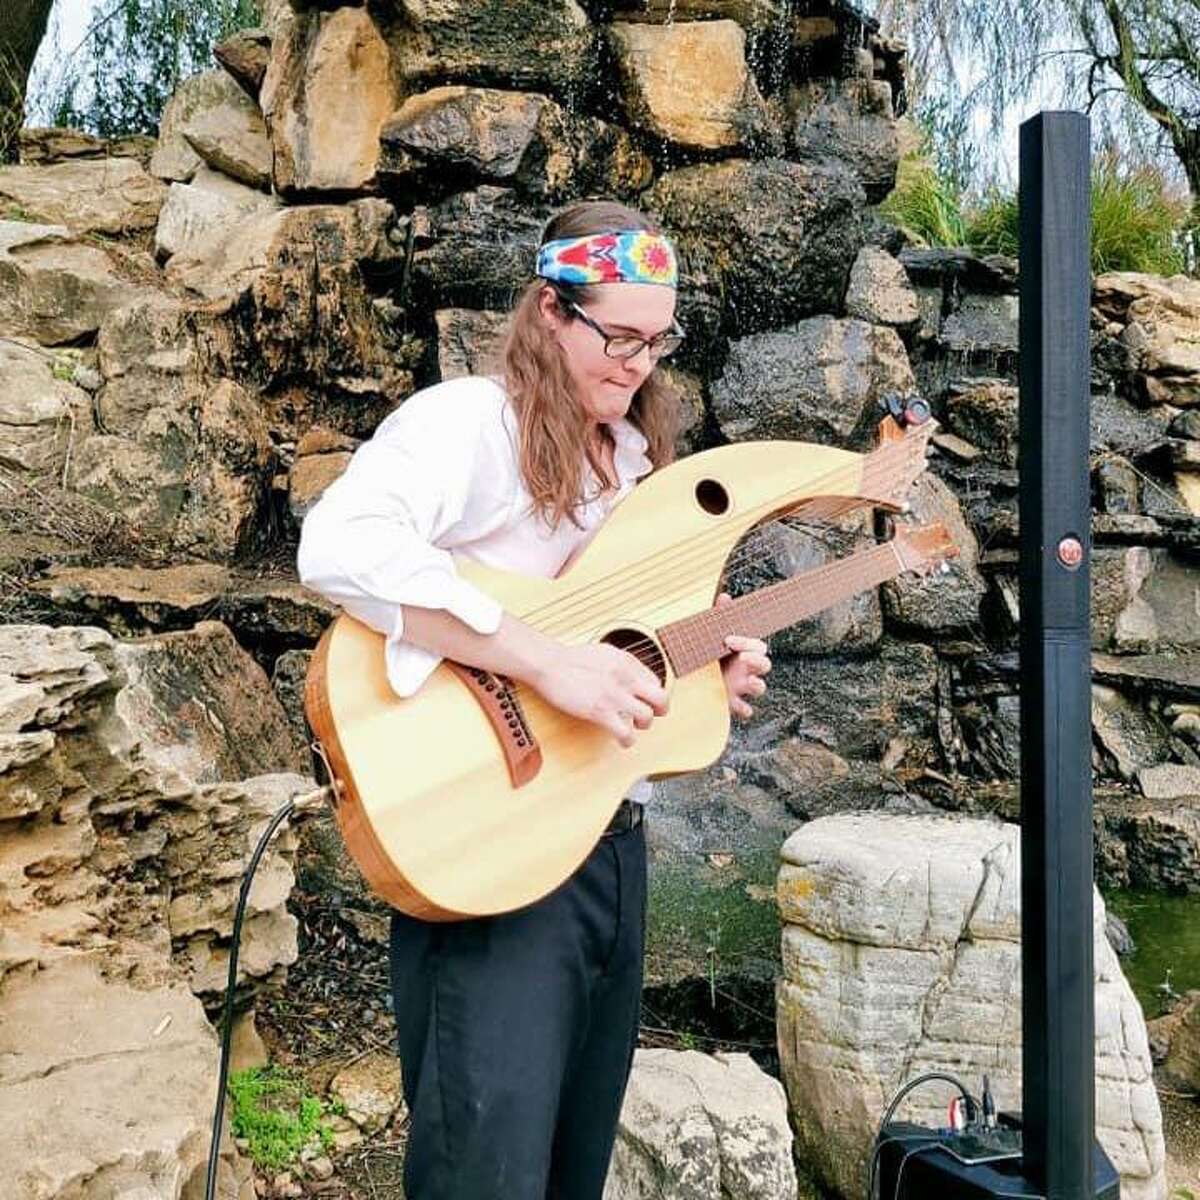 Darrius Spangler will play Grateful Dead medley at The Conservatory, 554 E Broadway, in Alton from 8-11 p.m. Thursday, Feb. 10.